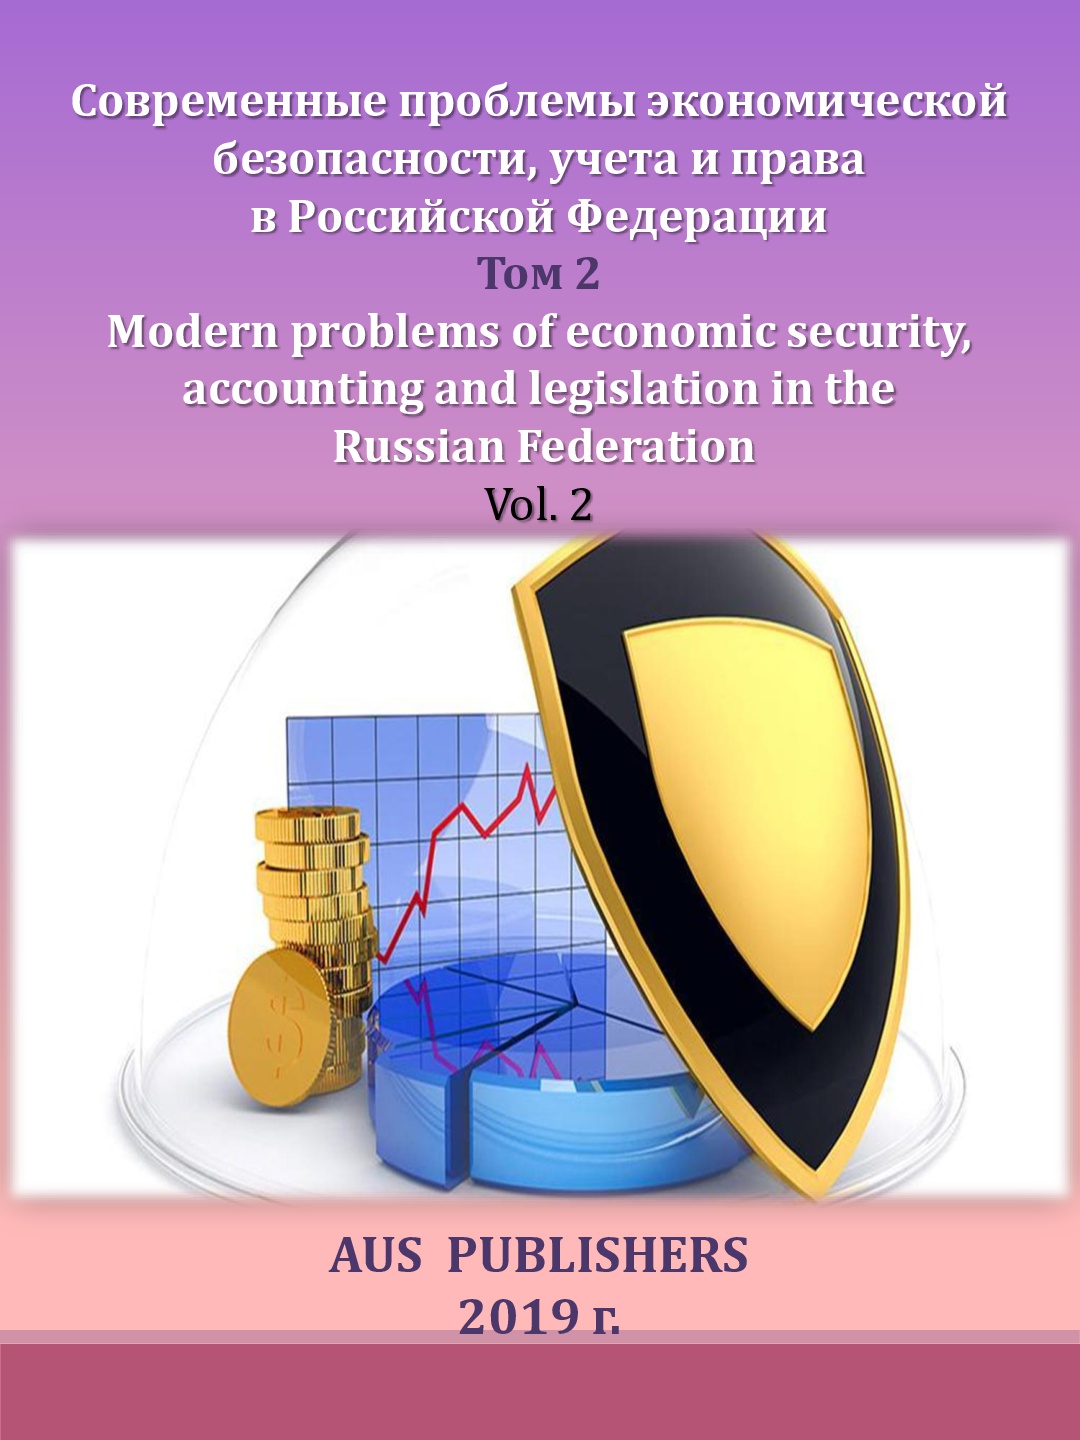                         Modern problems of an economic safety, accounting and the right in the Russian Federation. Vol.2
            